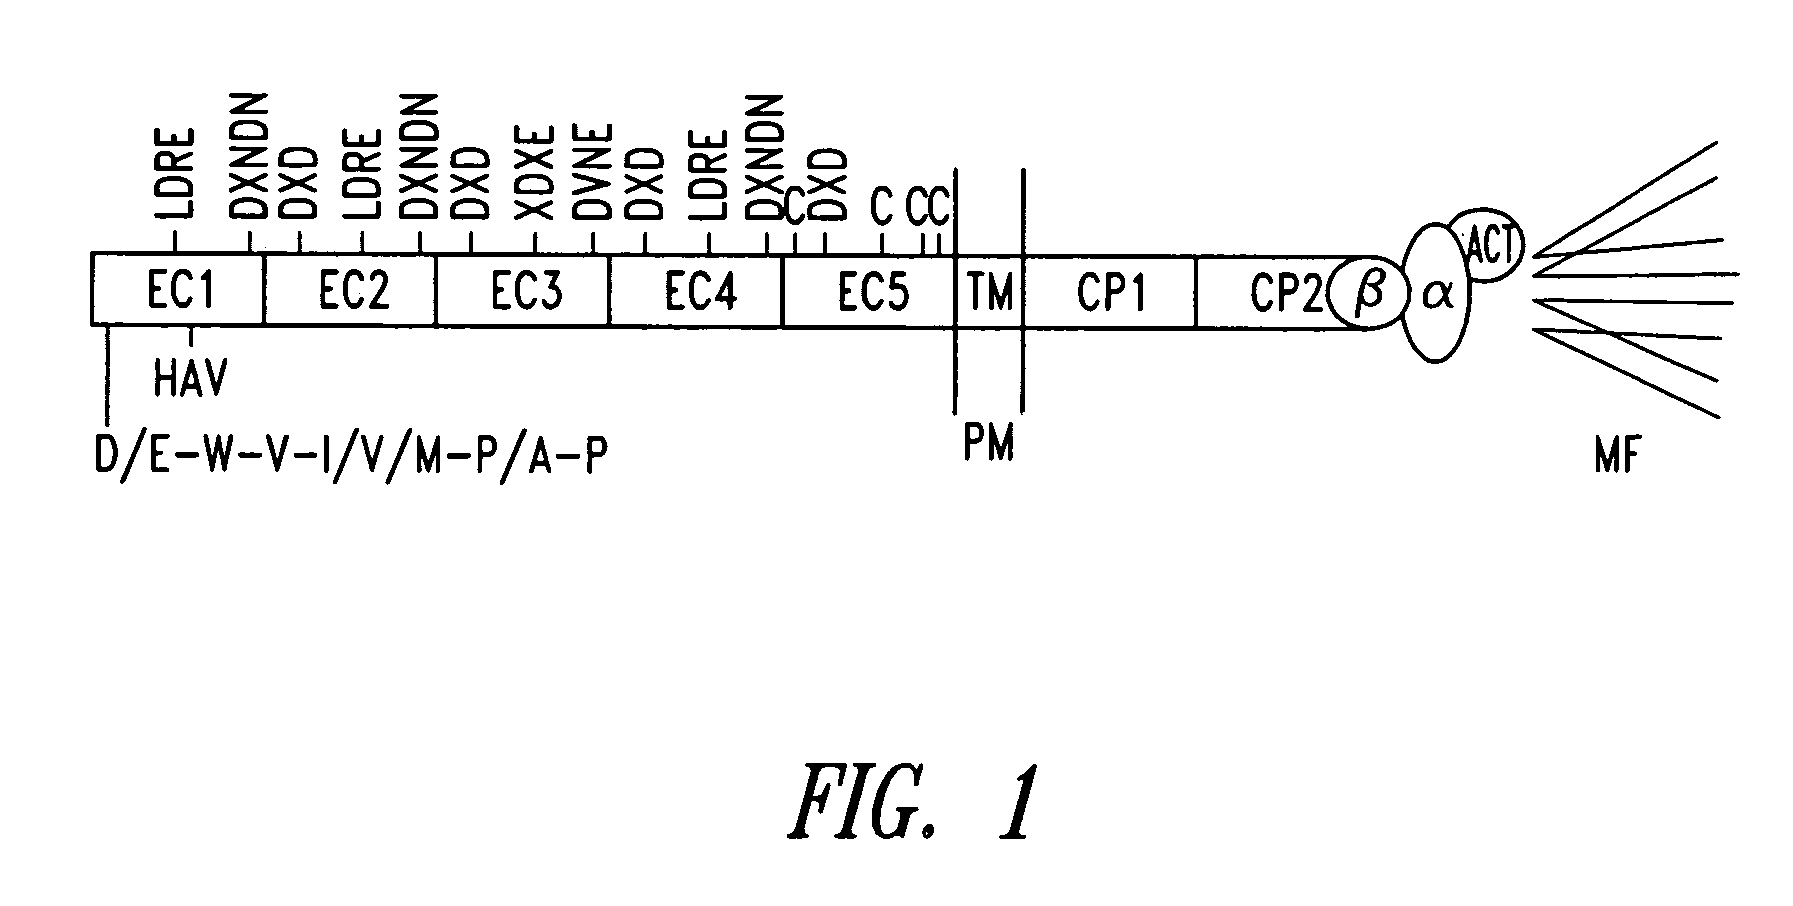 Compounds and methods for modulating functions of classical cadherins